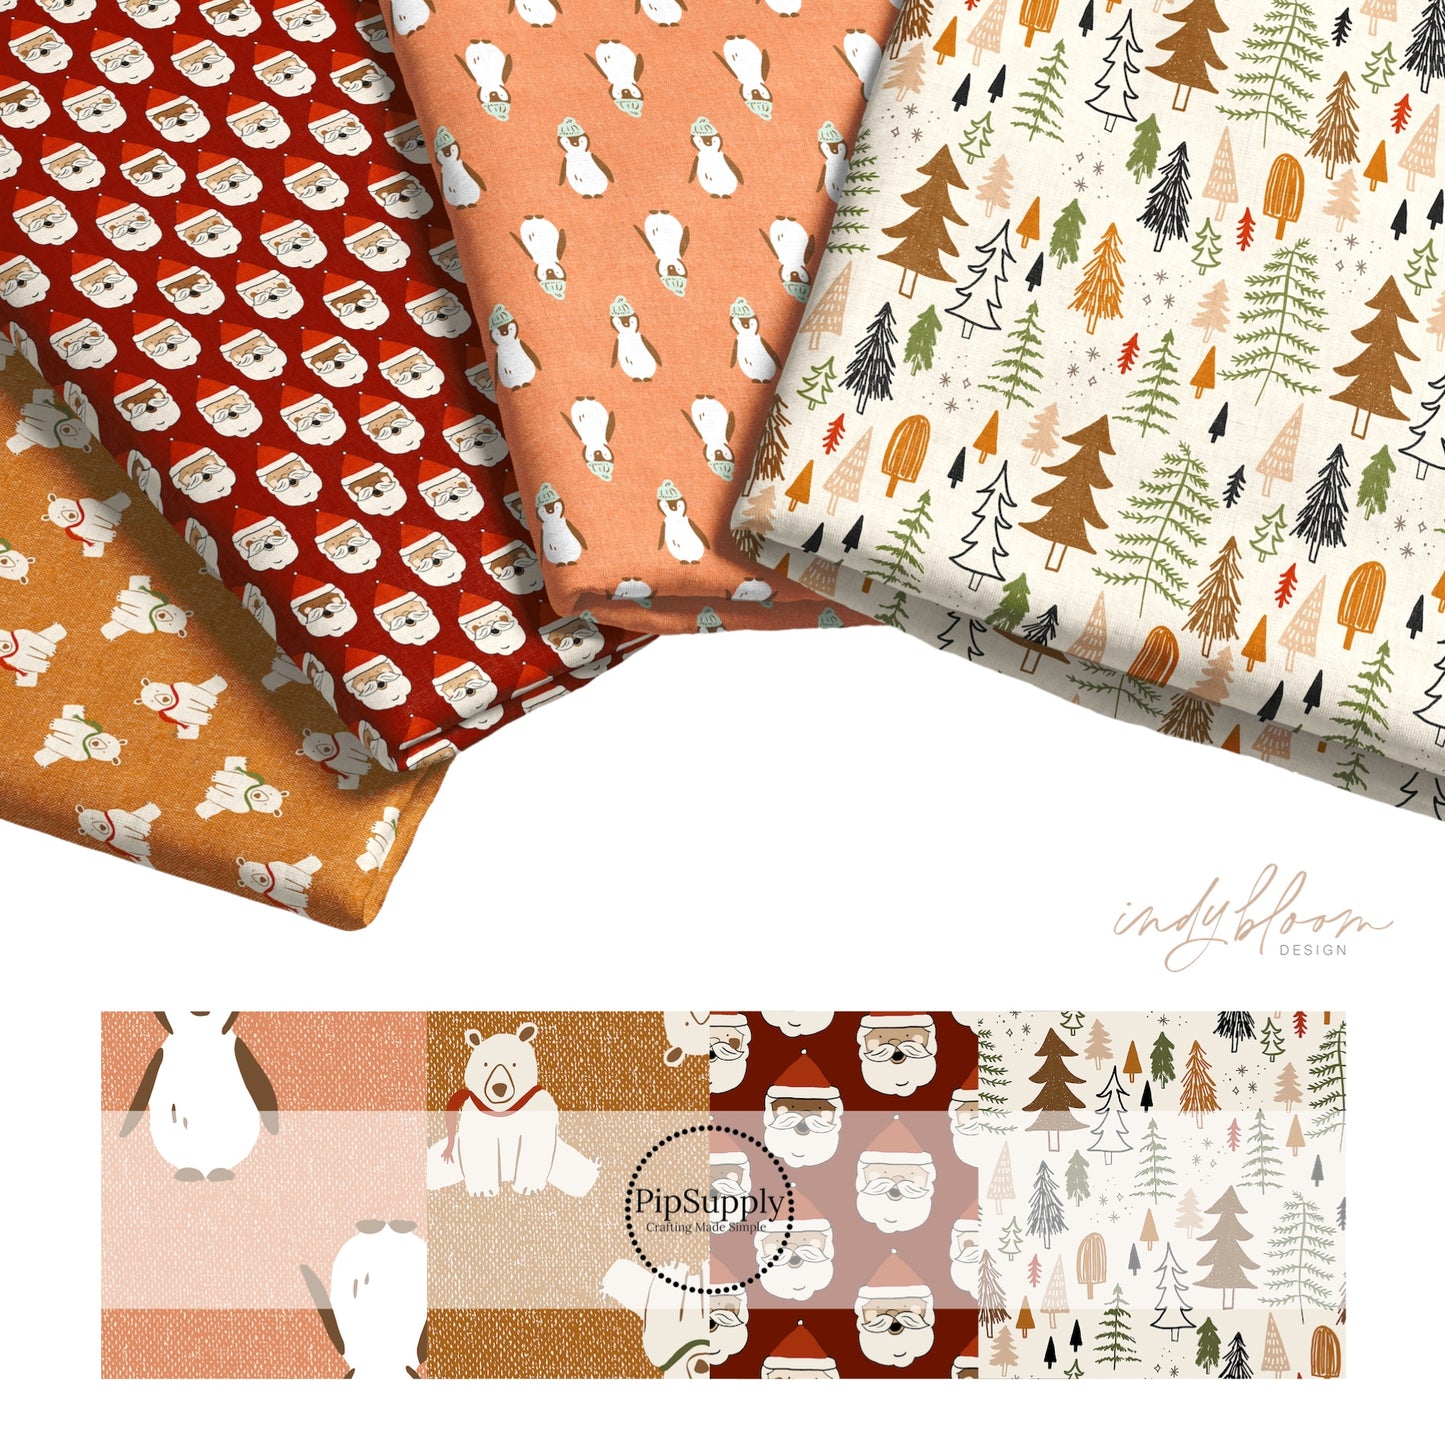 4 different multi color fabric layers with designs such as trees, santa, penguins, an polar bears